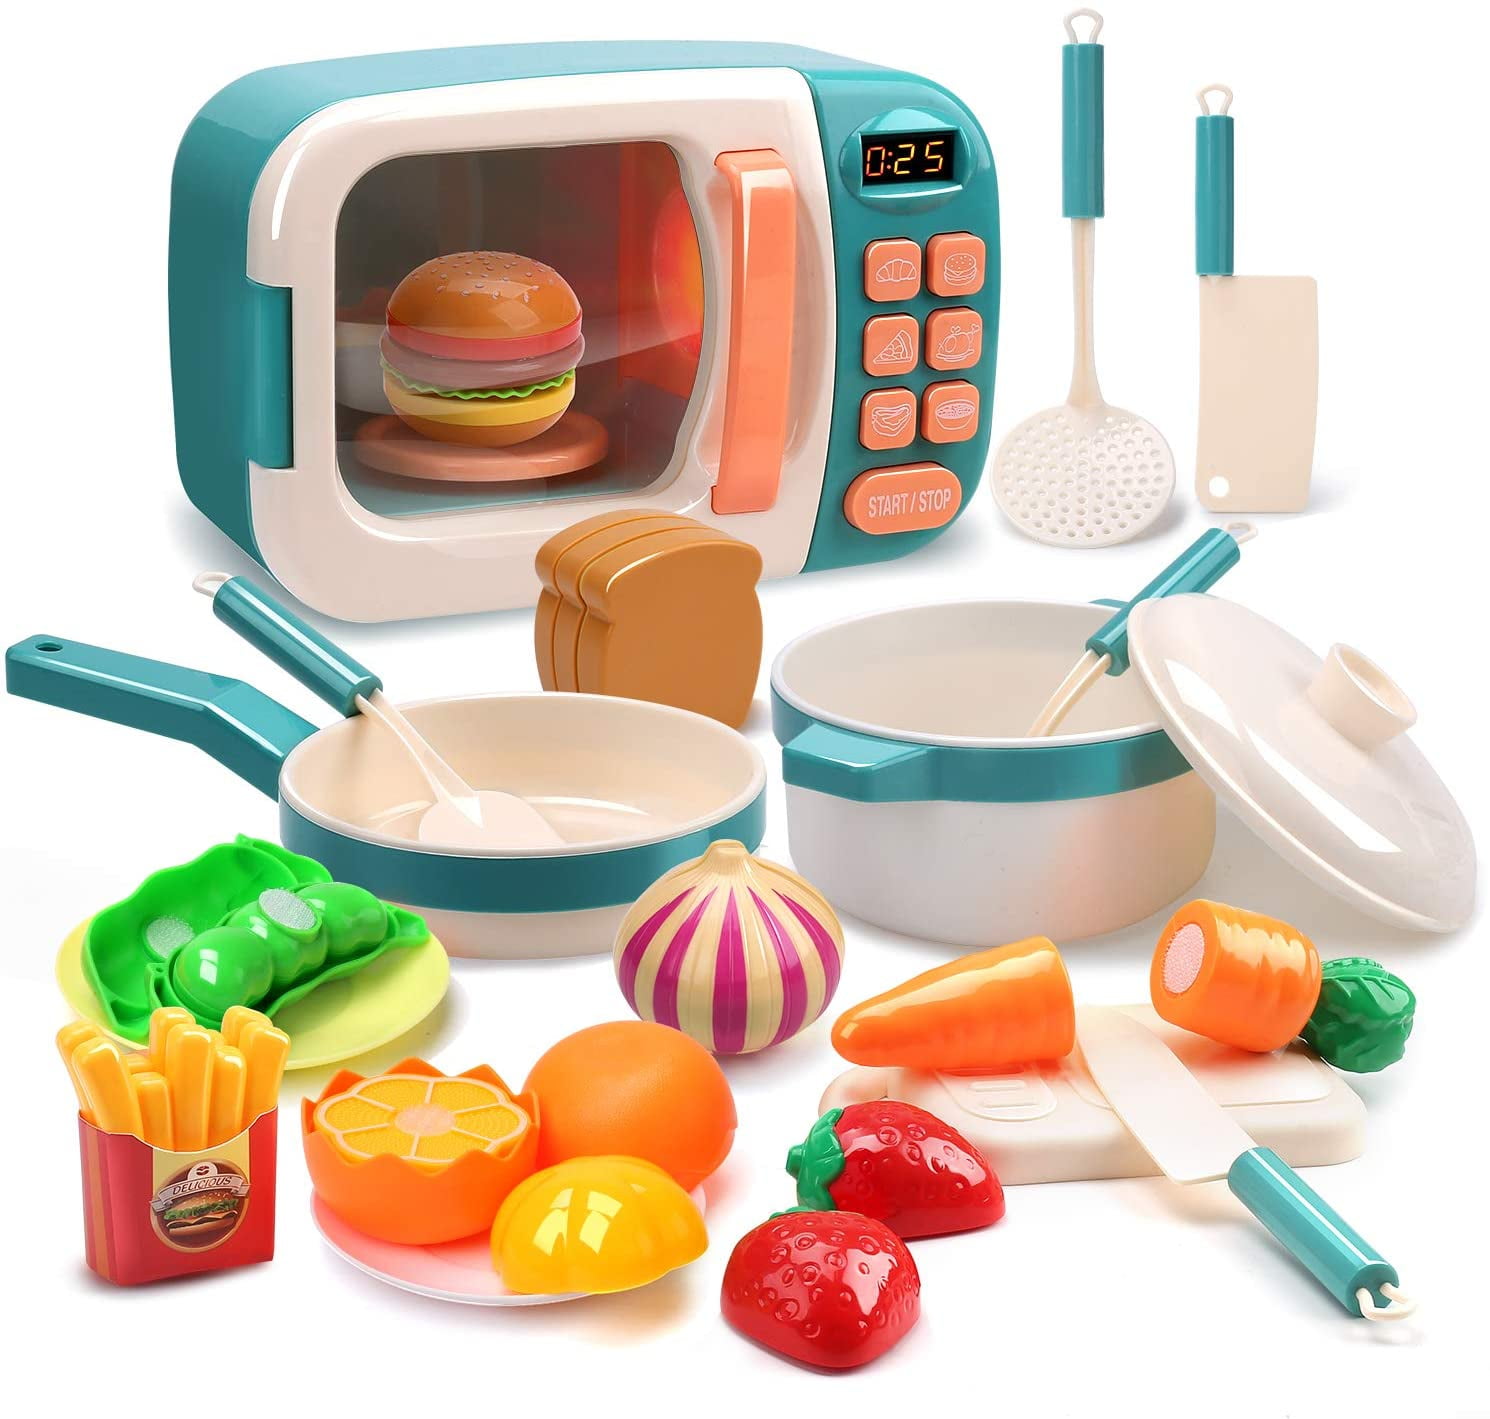 LARGE SMALL KIDS CHILDRENS KITCHEN PLAY SET FOOD COOKER PANS TOY GIFT 